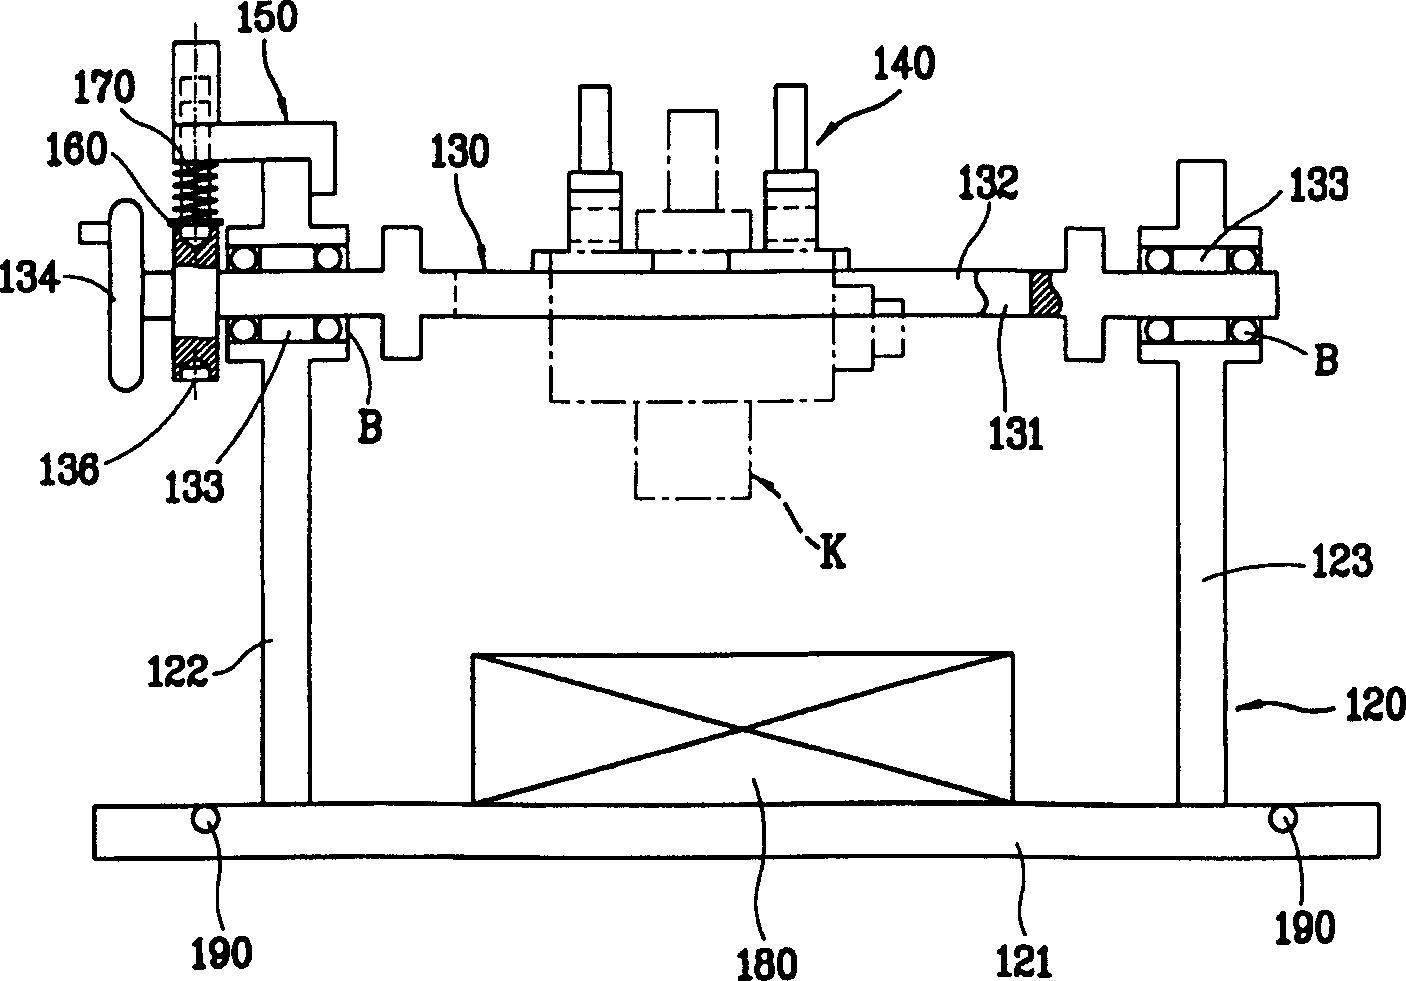 Clamp tool for testing electrode free illumination appliances